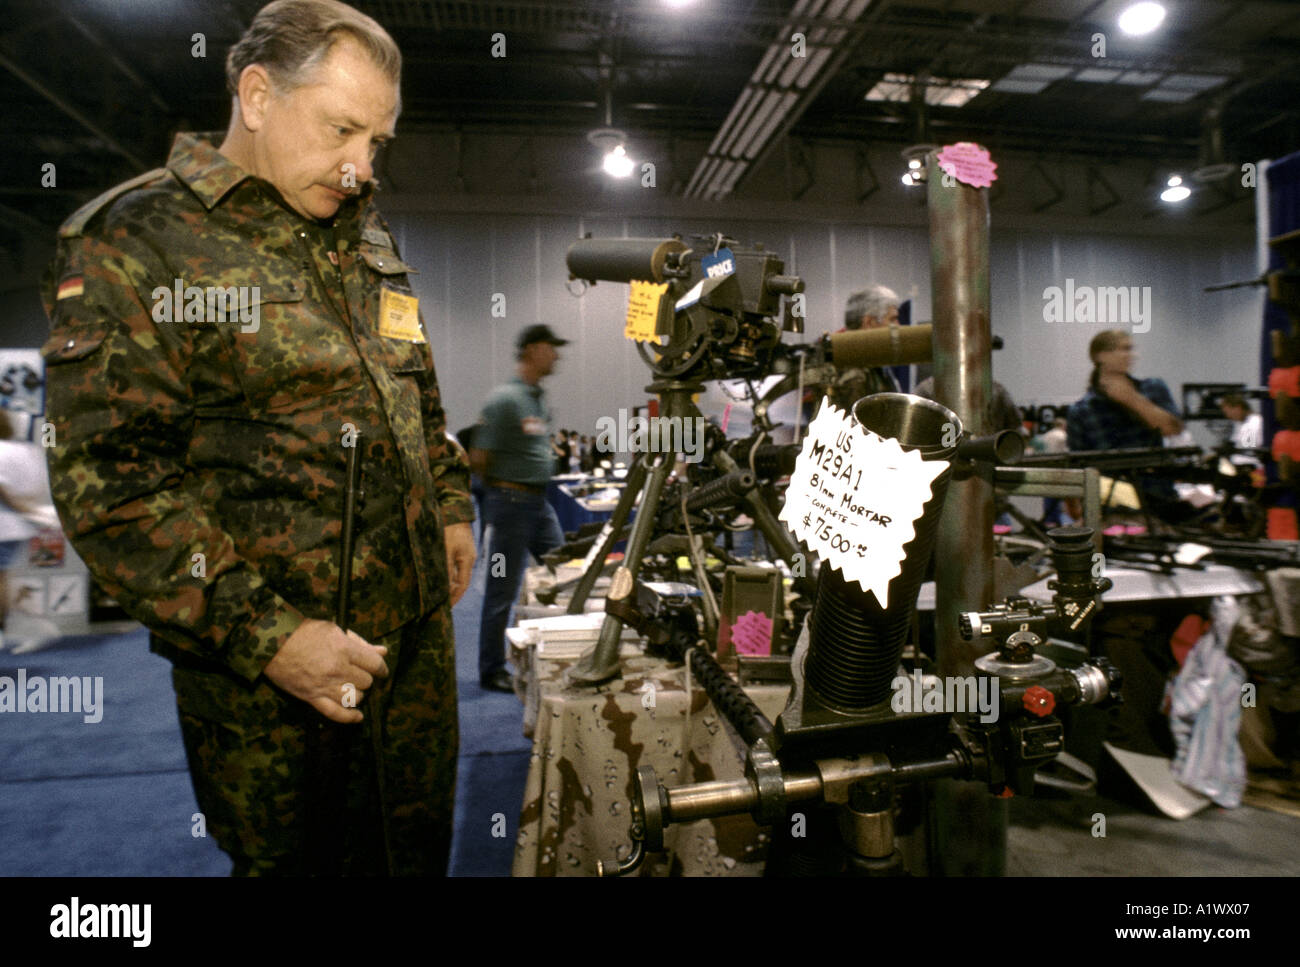 SOLDIERS OF FORTUNE CONVENTIONEER THE BARREL OF A GUN IN HIS HAND PONDERS ON PURCHASING THE FULLY WORKING 81MM MORTER AT THE 15TH ANNIVERSARY SOLDIER OF fortune magazine annual convention sands hotel las vegas 1994 Stock Photo